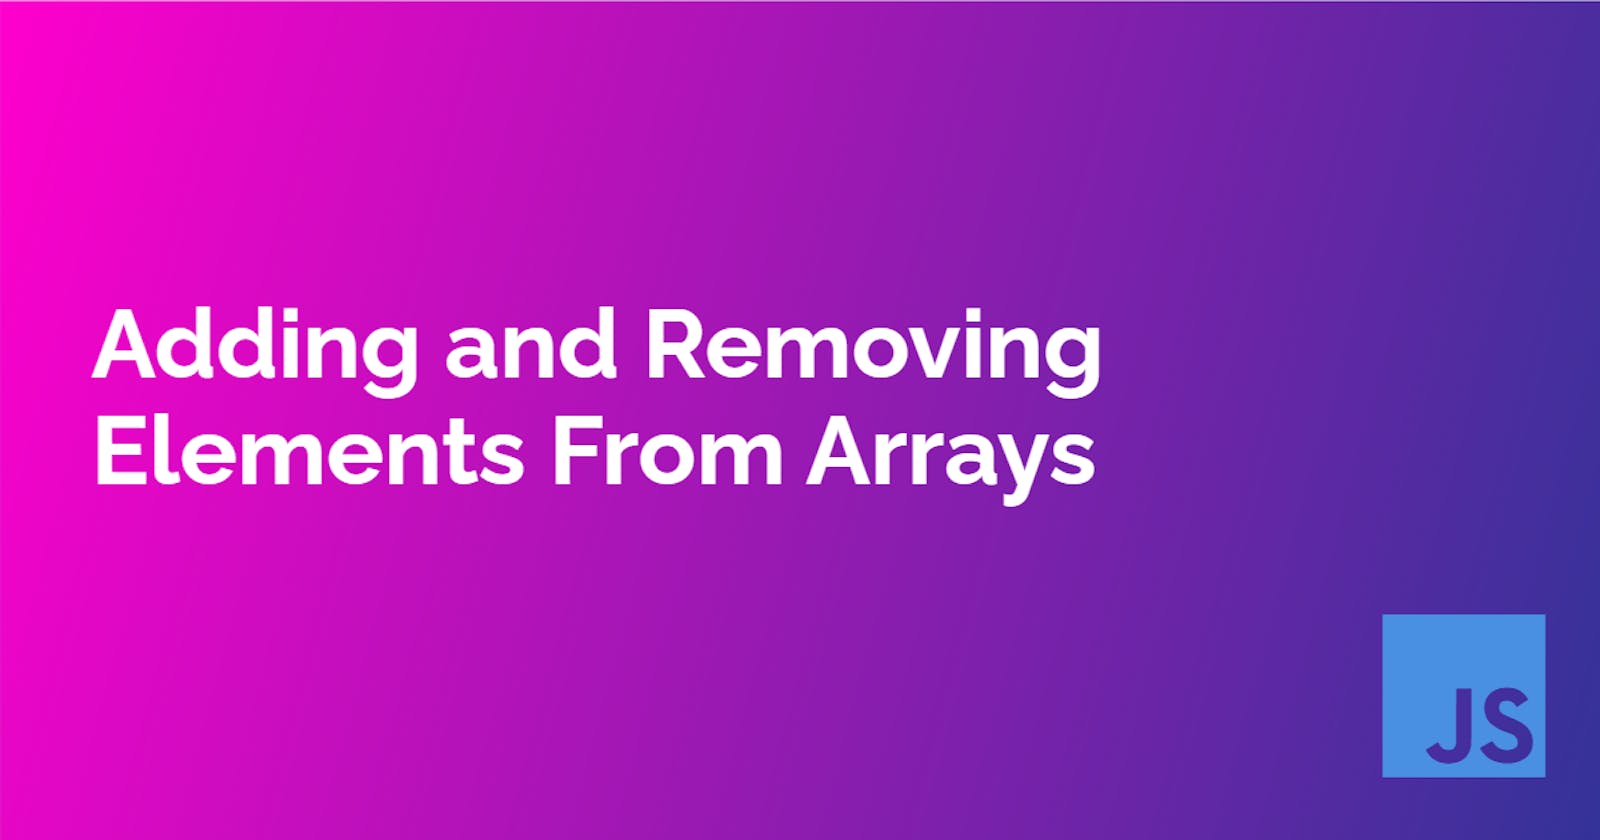 Adding and Removing Elements From Arrays